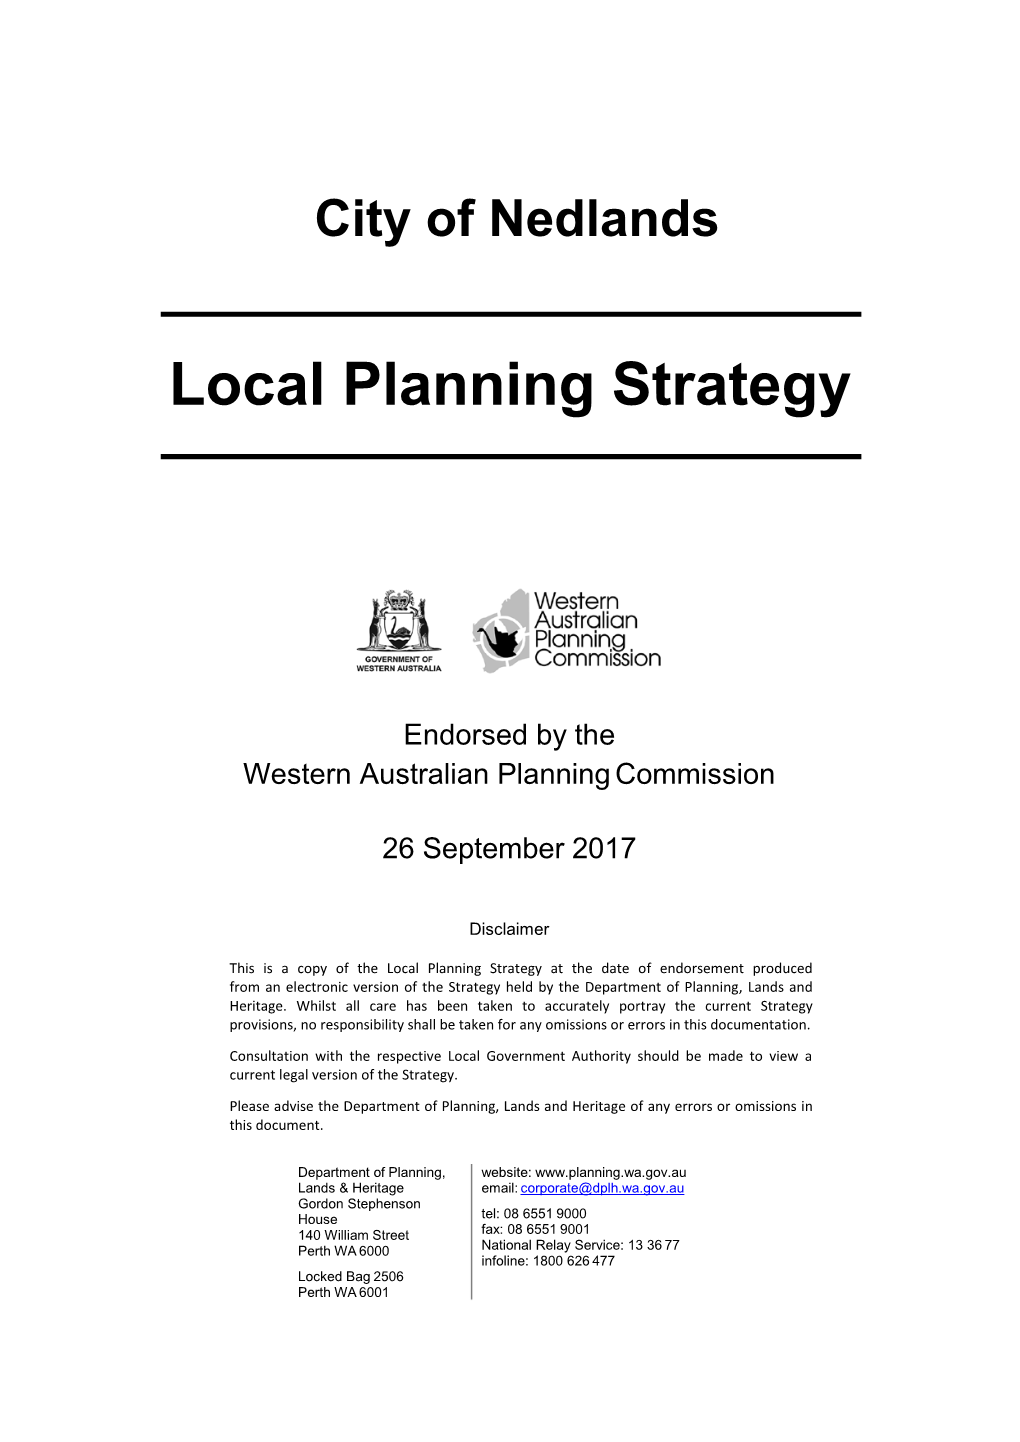 City of Nedlands Local Planning Strategy